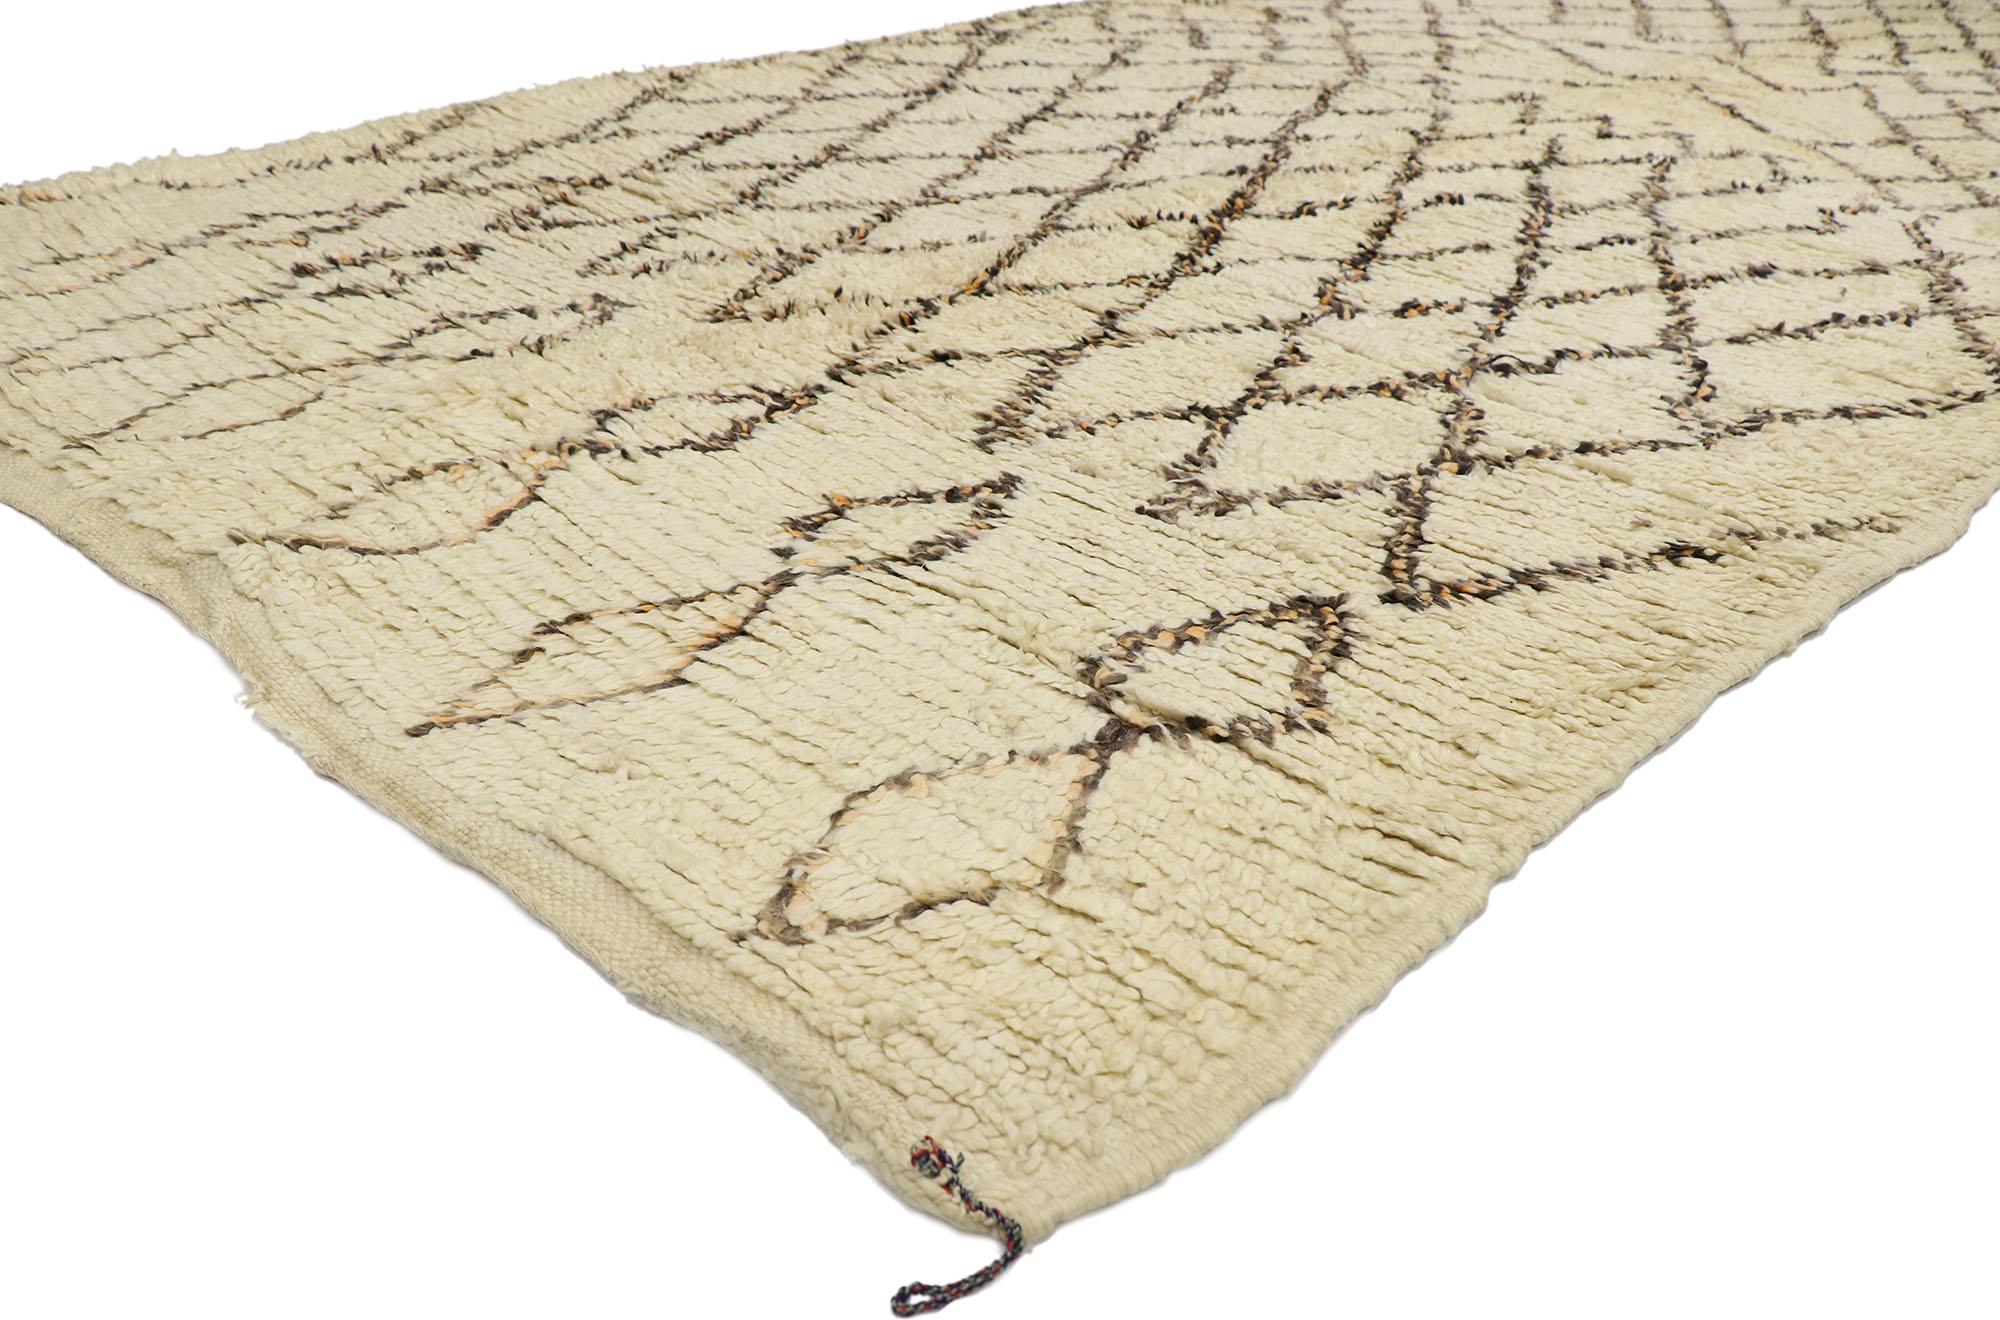 21348 vintage Berber Beni Ourain Moroccan rug with Mid-Century Modern style 06'08 x 13'05. With its simplicity, plush pile and Mid-Century Modern style, this hand knotted wool vintage Berber Beni Ourain Moroccan rug provides a feeling of cozy